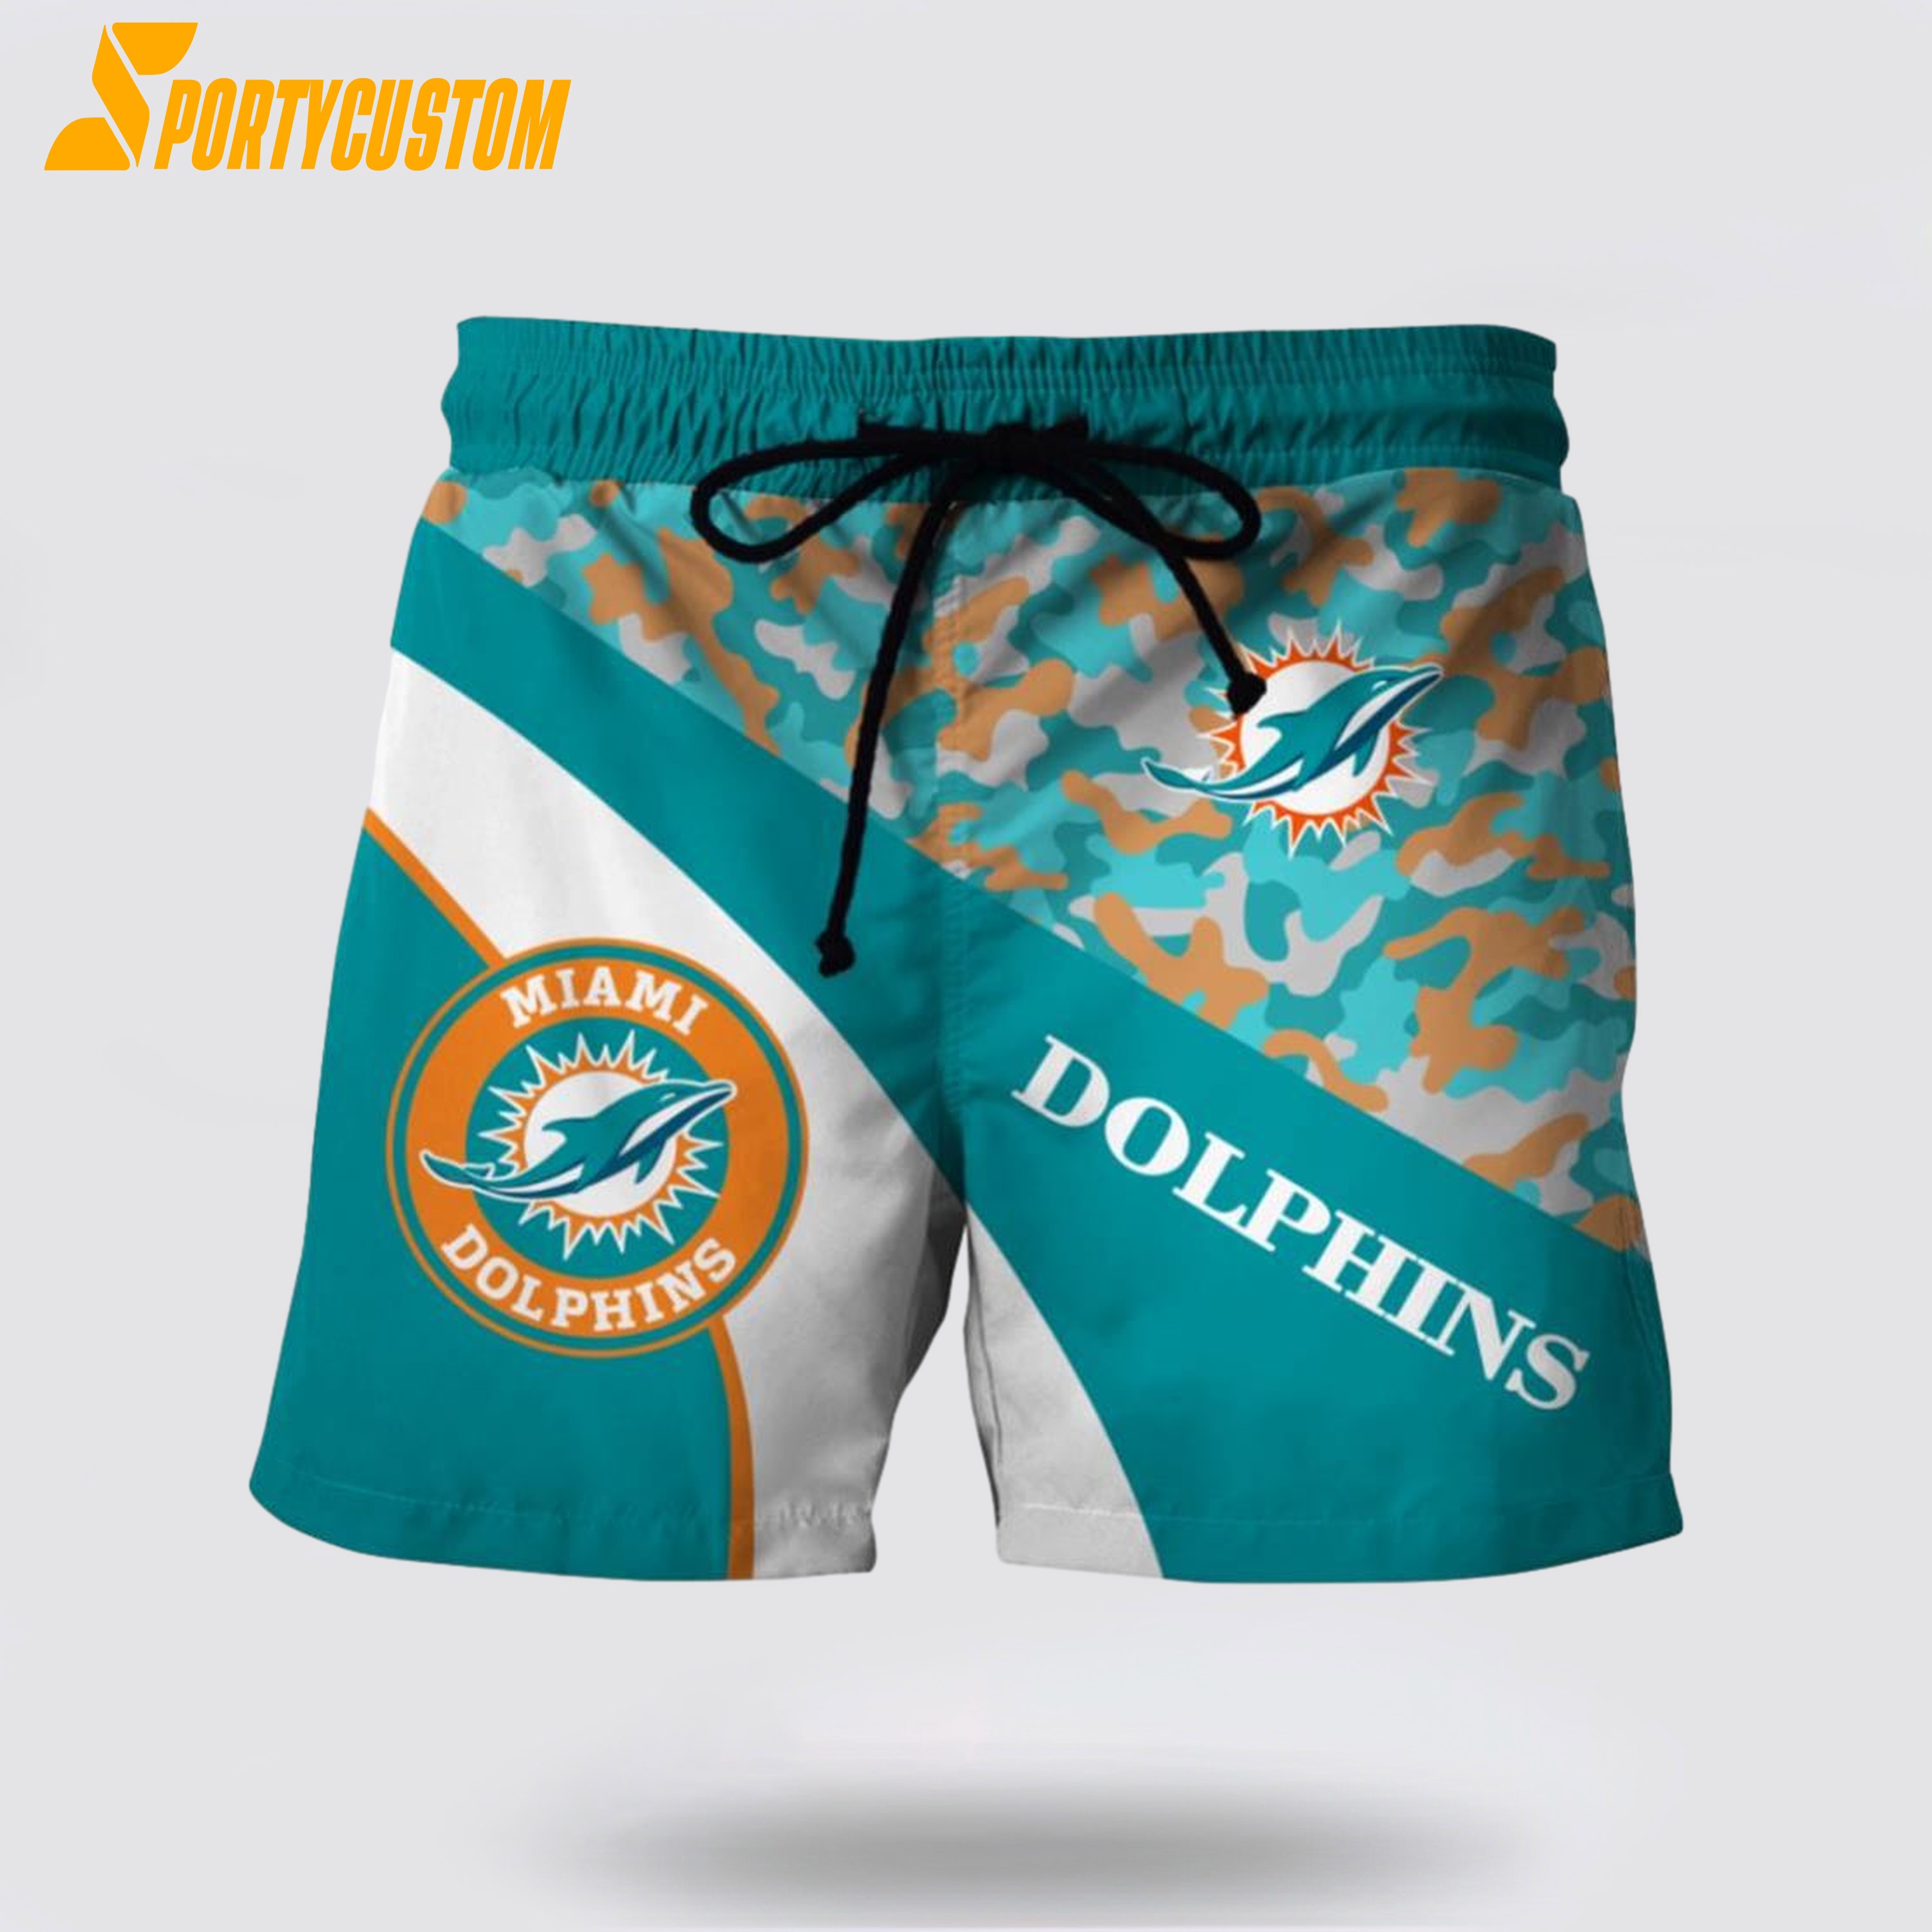 Miami Dolphins Shop - Miami Dolphins Mens Nfl Beach Board Shorts Gear Up For Summer Adventures With Authenticity